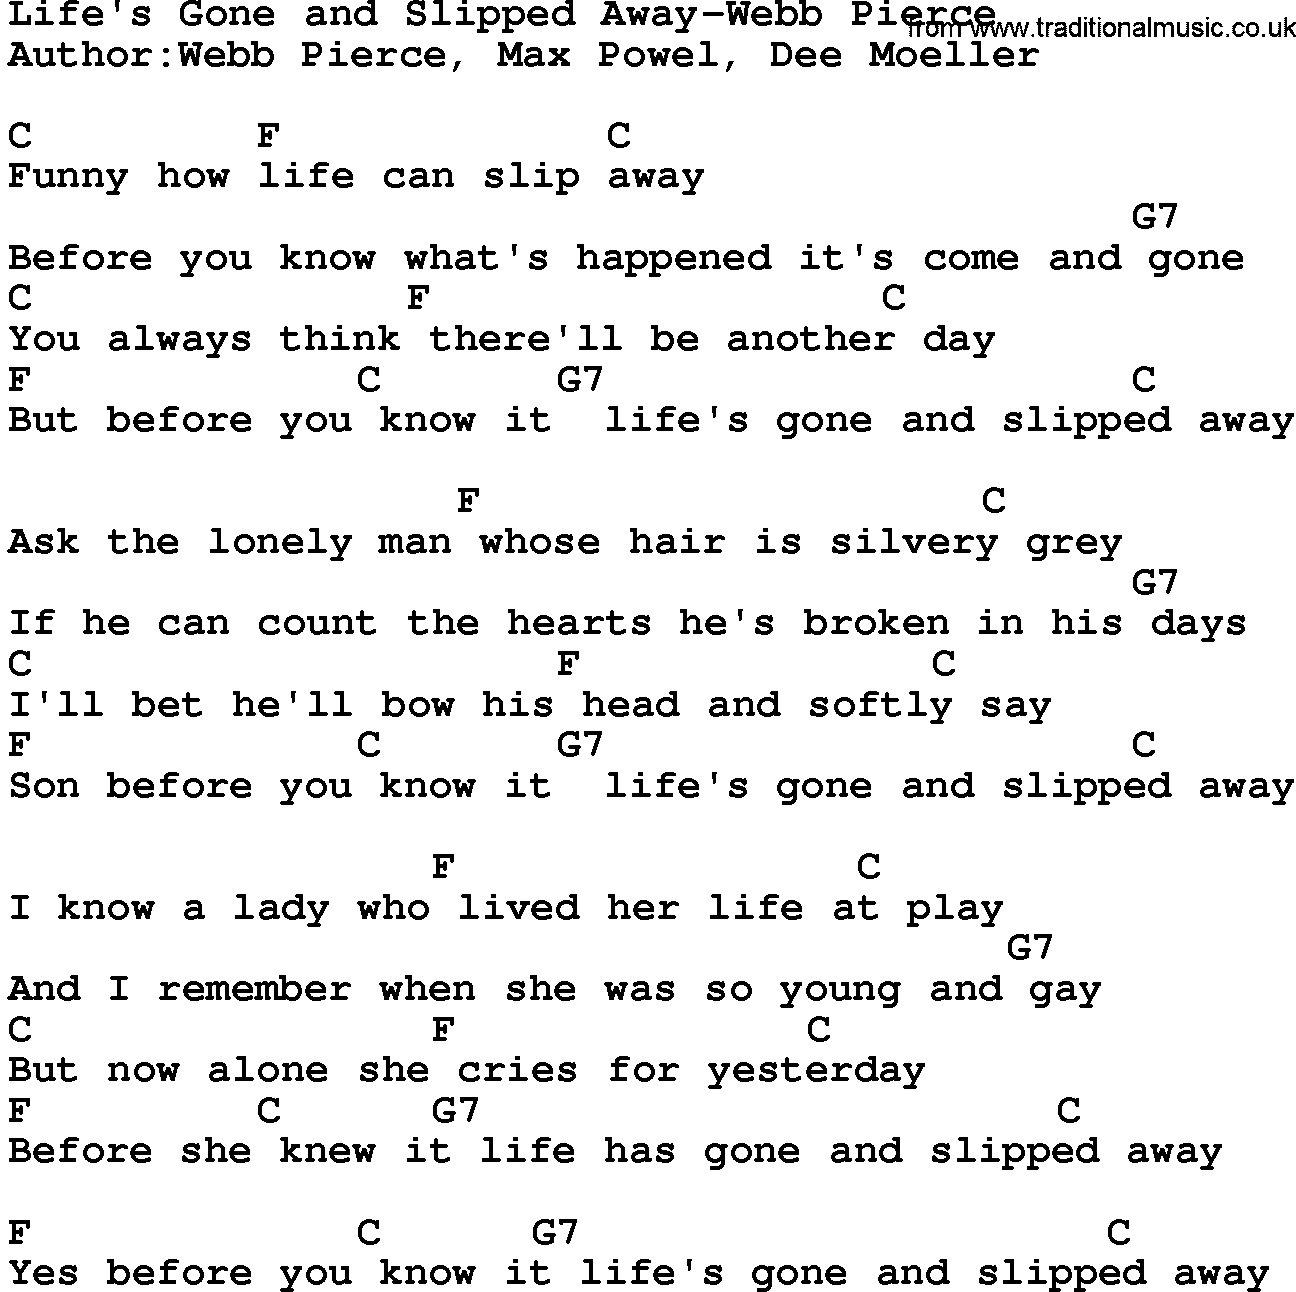 Country music song: Life's Gone And Slipped Away-Webb Pierce lyrics and chords